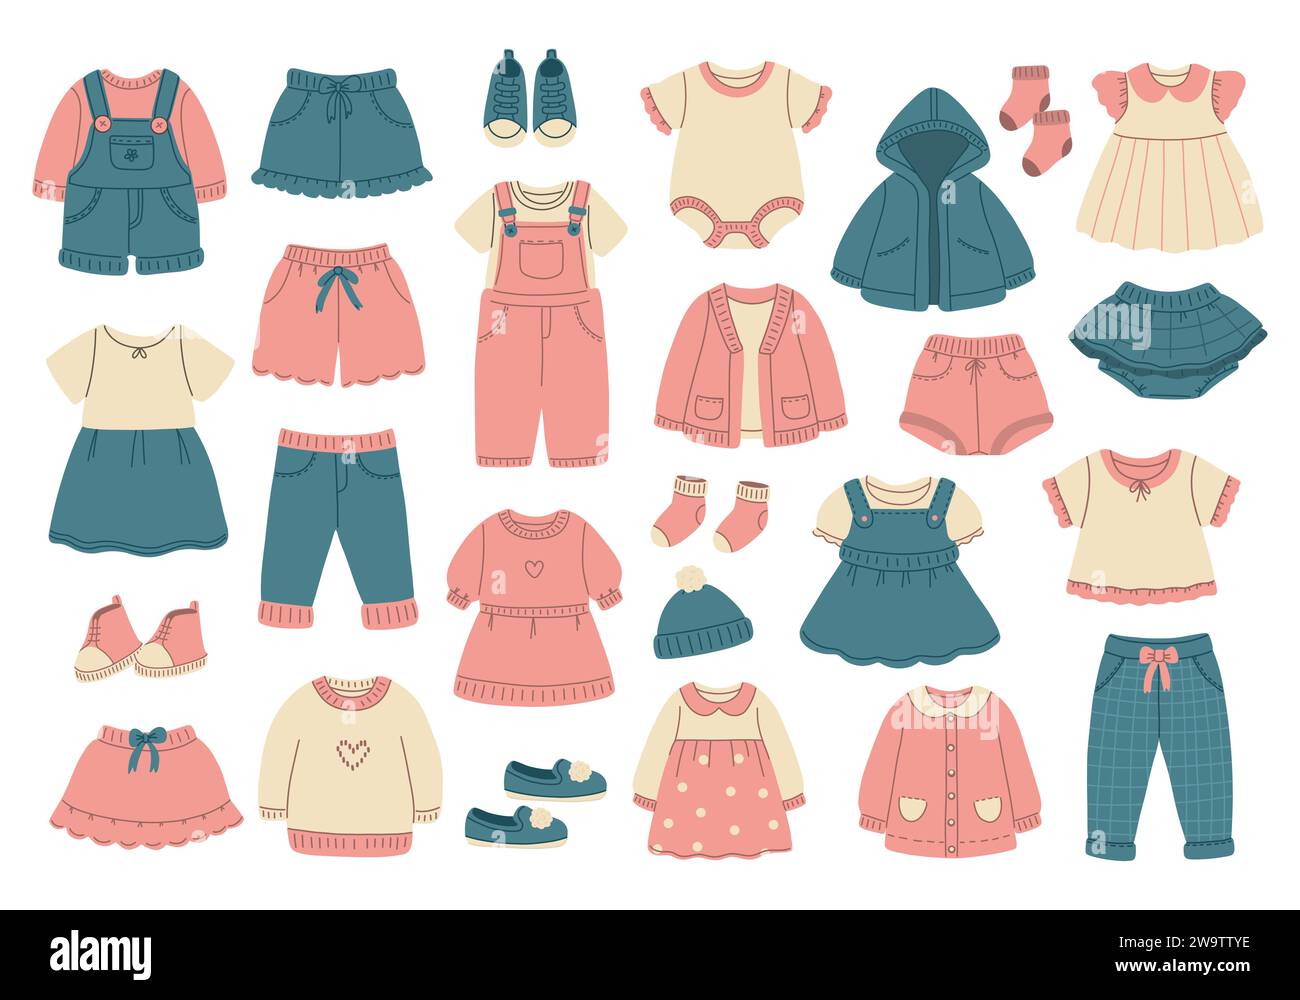 Modern kids clothes set. Fashion garments for girls. Collection of stylish casual children wearing.  Stock Vector